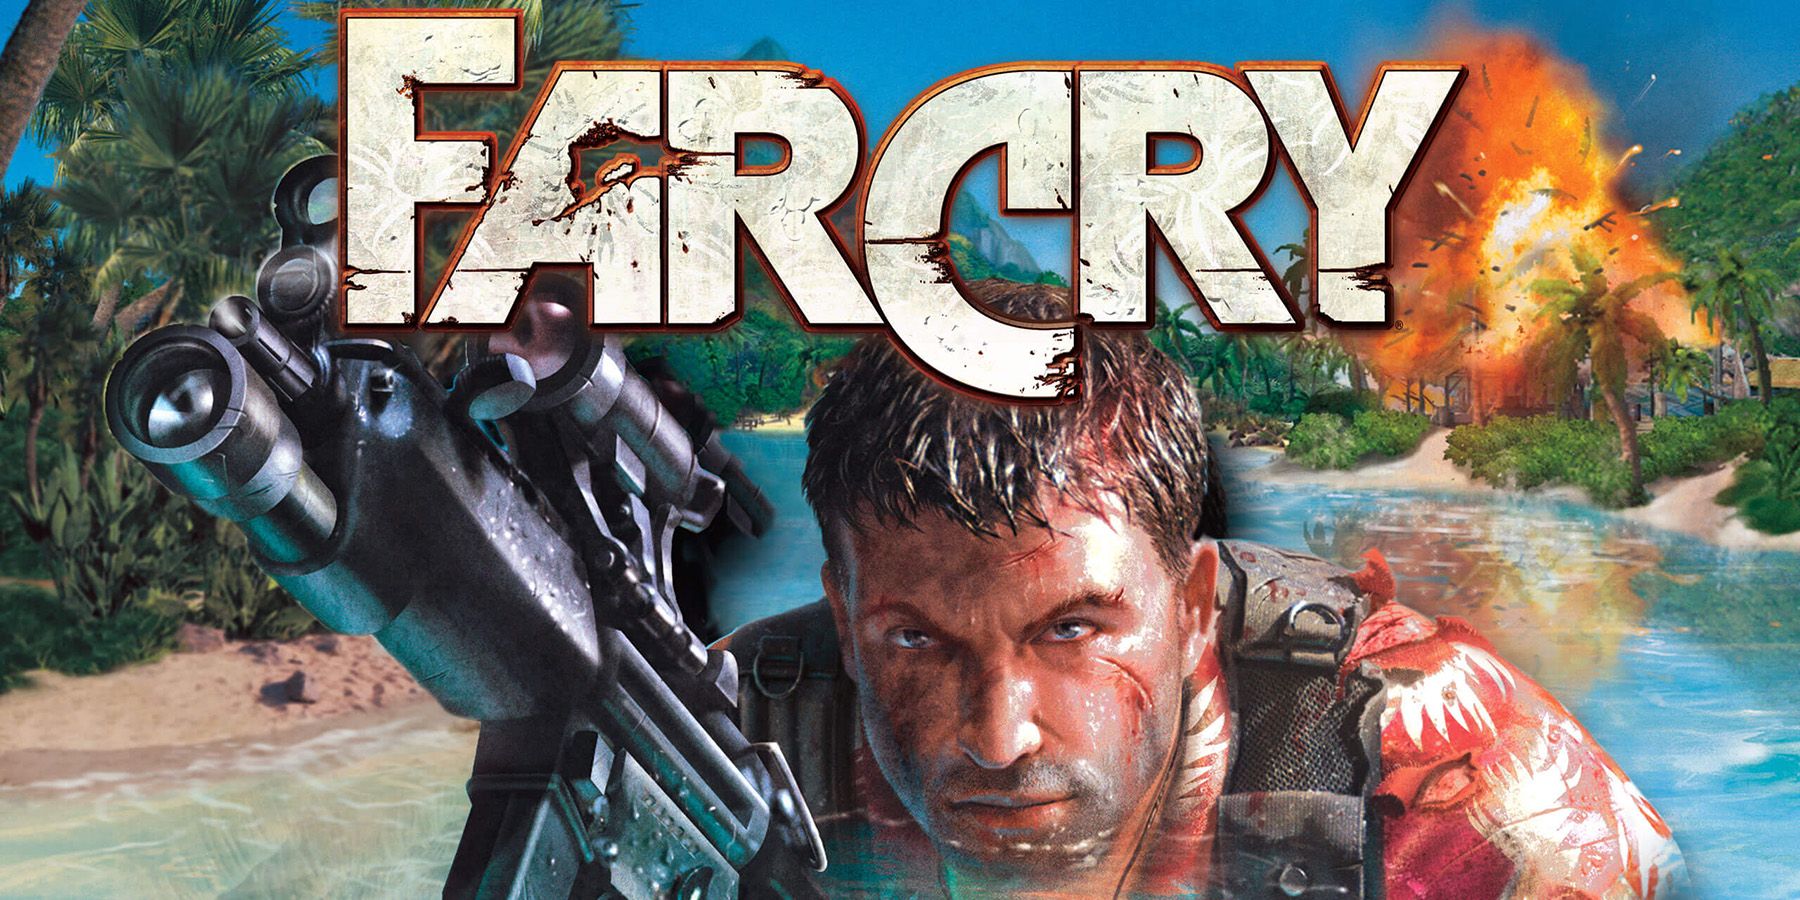 For a game that came out 18 years ago, Far Cry 1 still looks